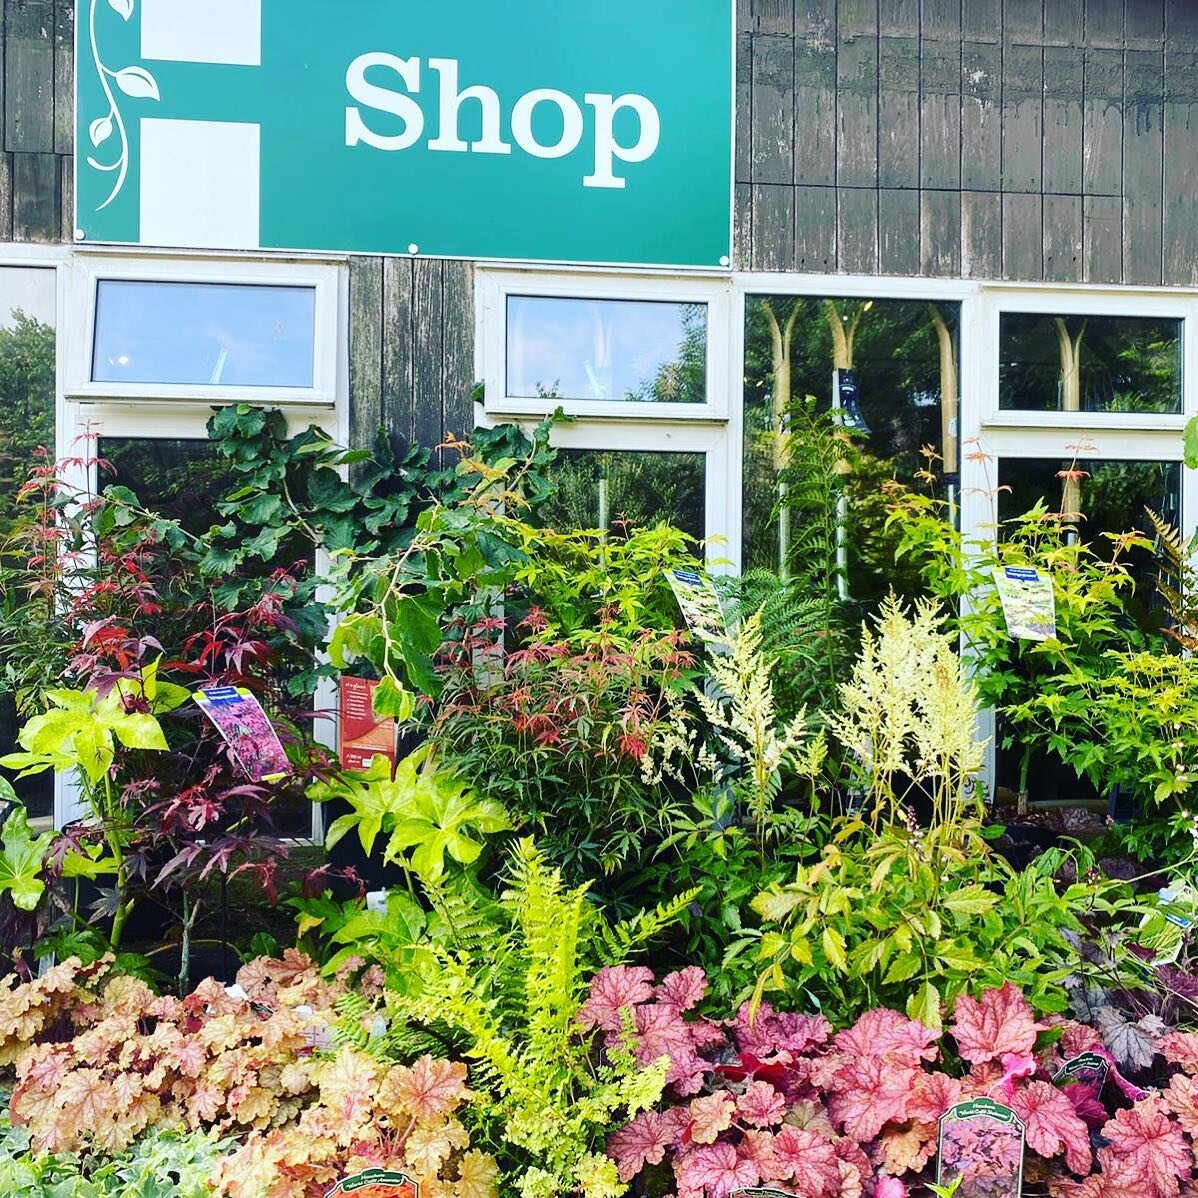 We&rsquo;re open all weekend ( and 7 days a week ) 10am-5pm @harboroughnurseries telephone ☎️ 01424 814220 location: TN35 4LU on the A259 at The Thorne, Guestling. #gardendesign #gardeninspiration #gardencentre